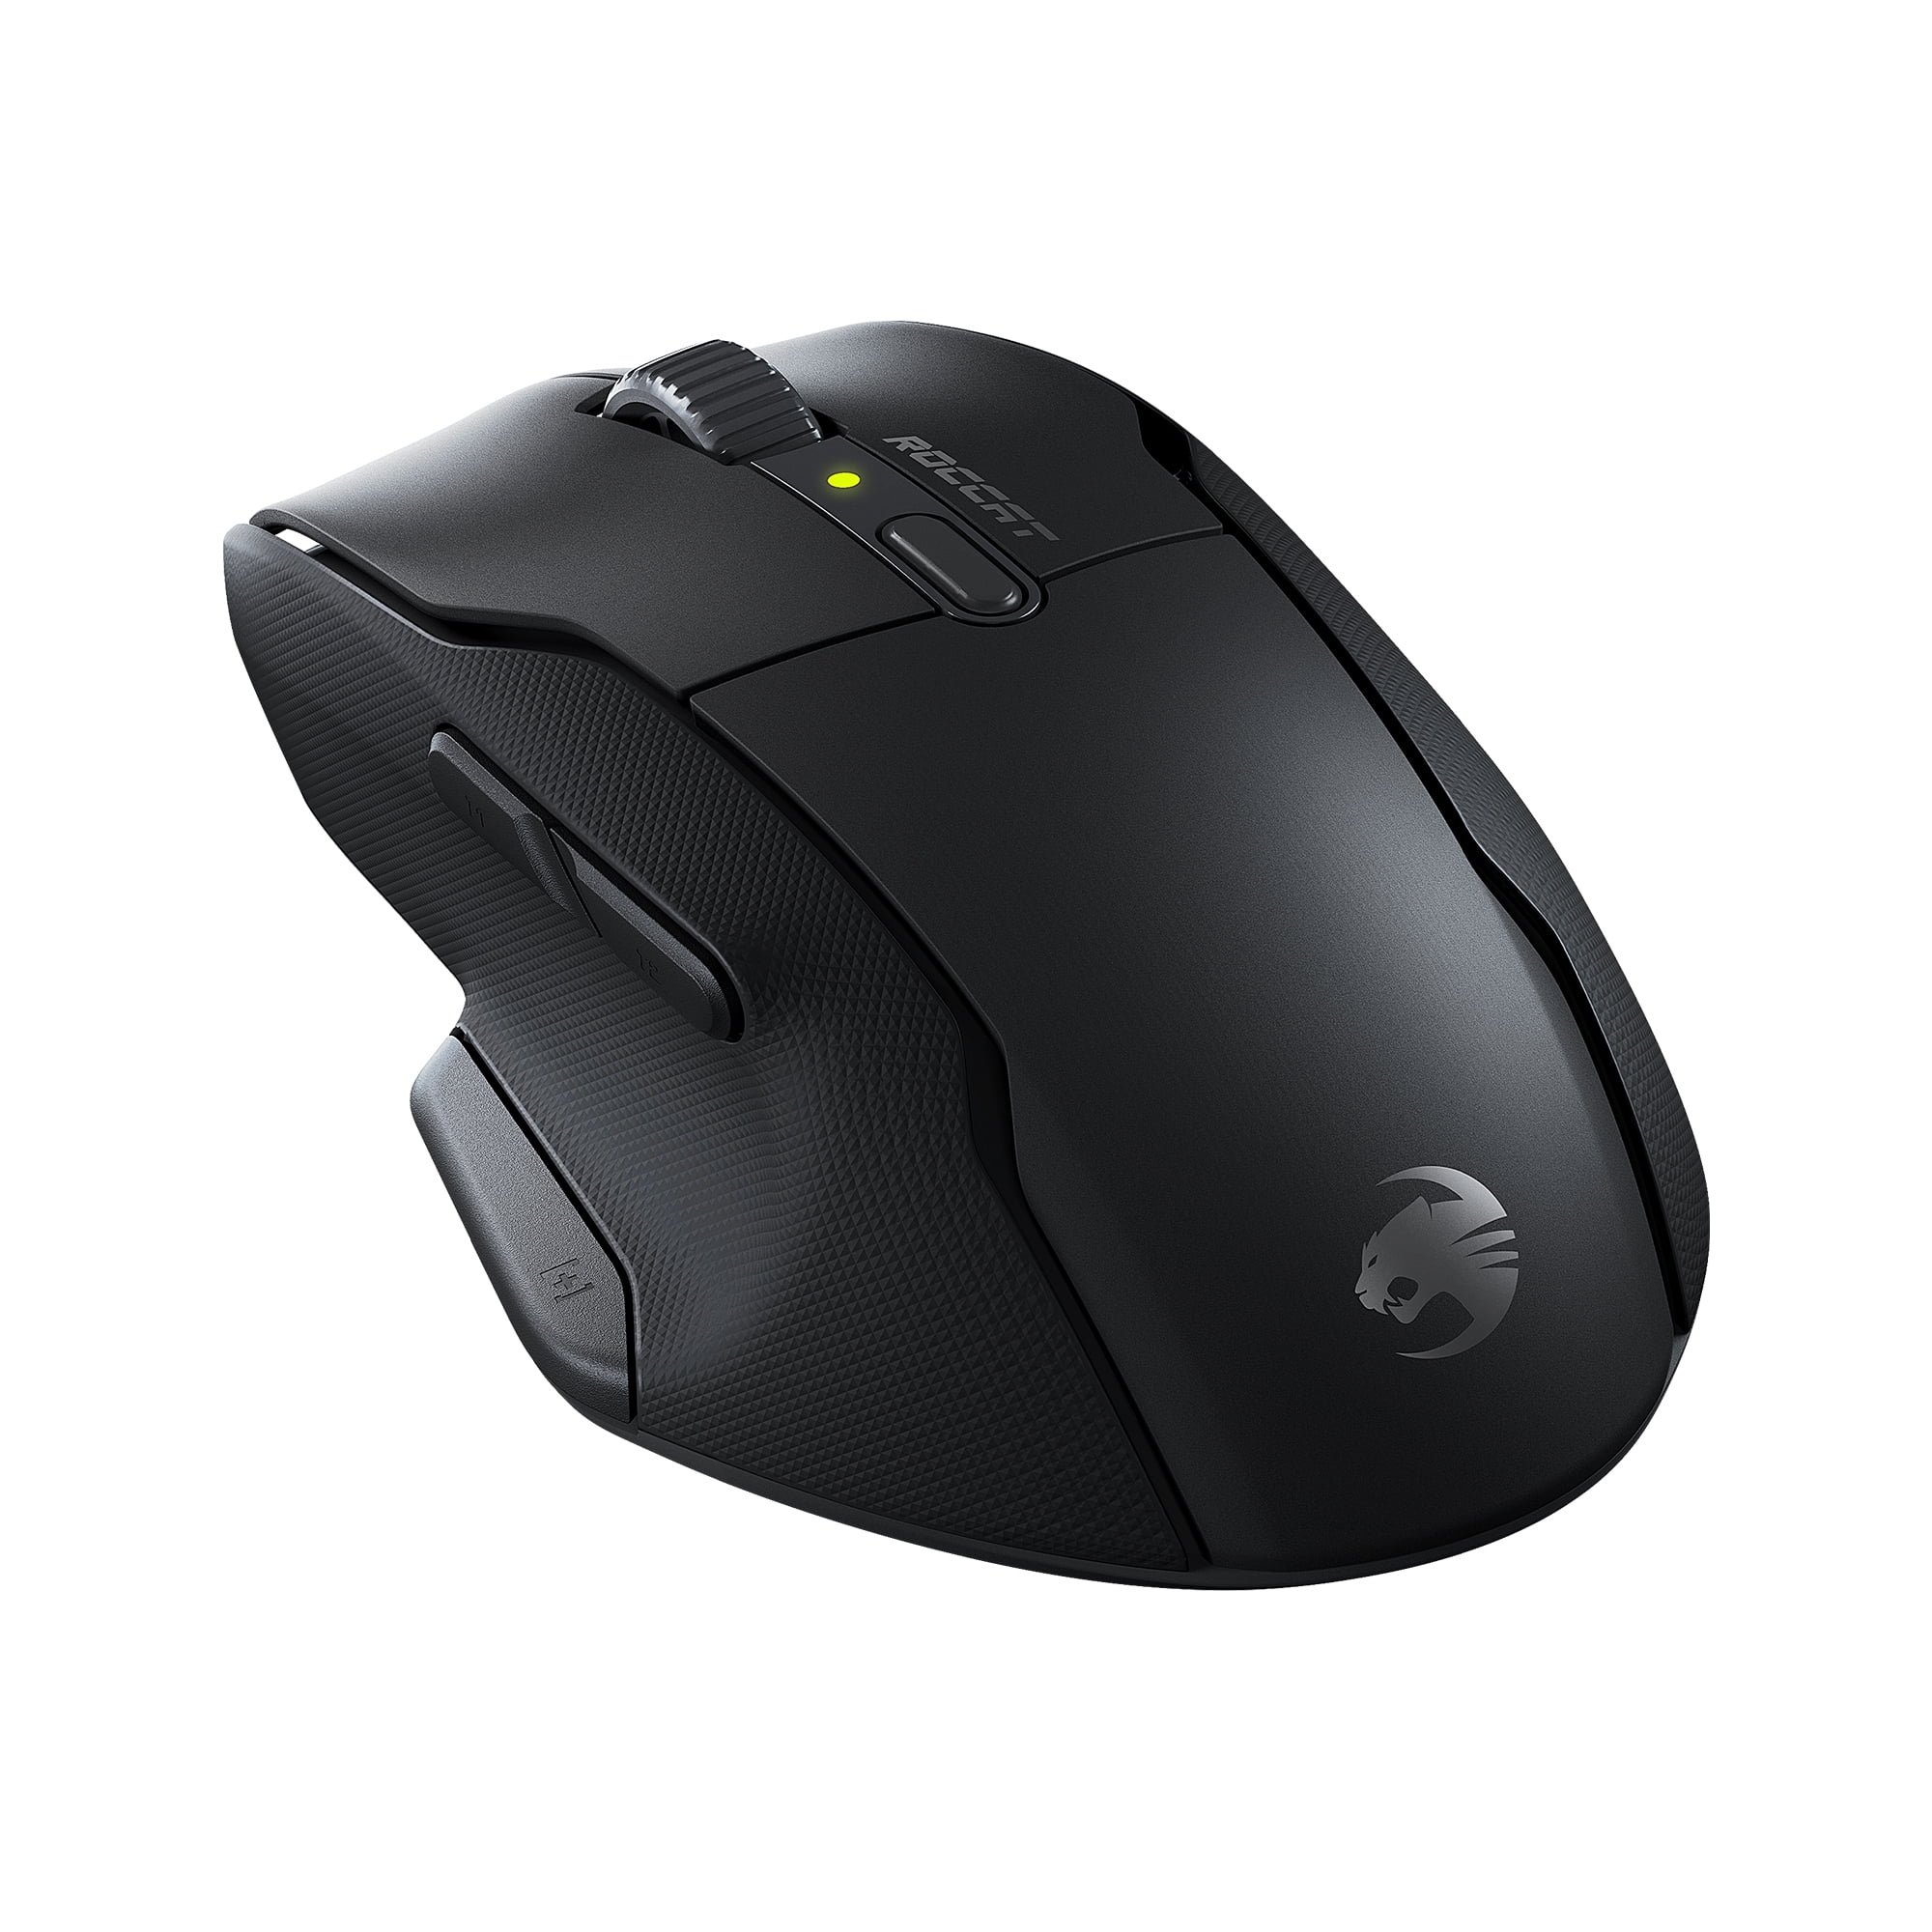 ROCCAT Kone Air - Wireless Life, Titan DPI Ergonomic Black Battery Double-Injected Button Side Switches Grips, Programmable Mouse Optical & - Optical Design 19K Rubber With Gaming Sensor, 800-hour